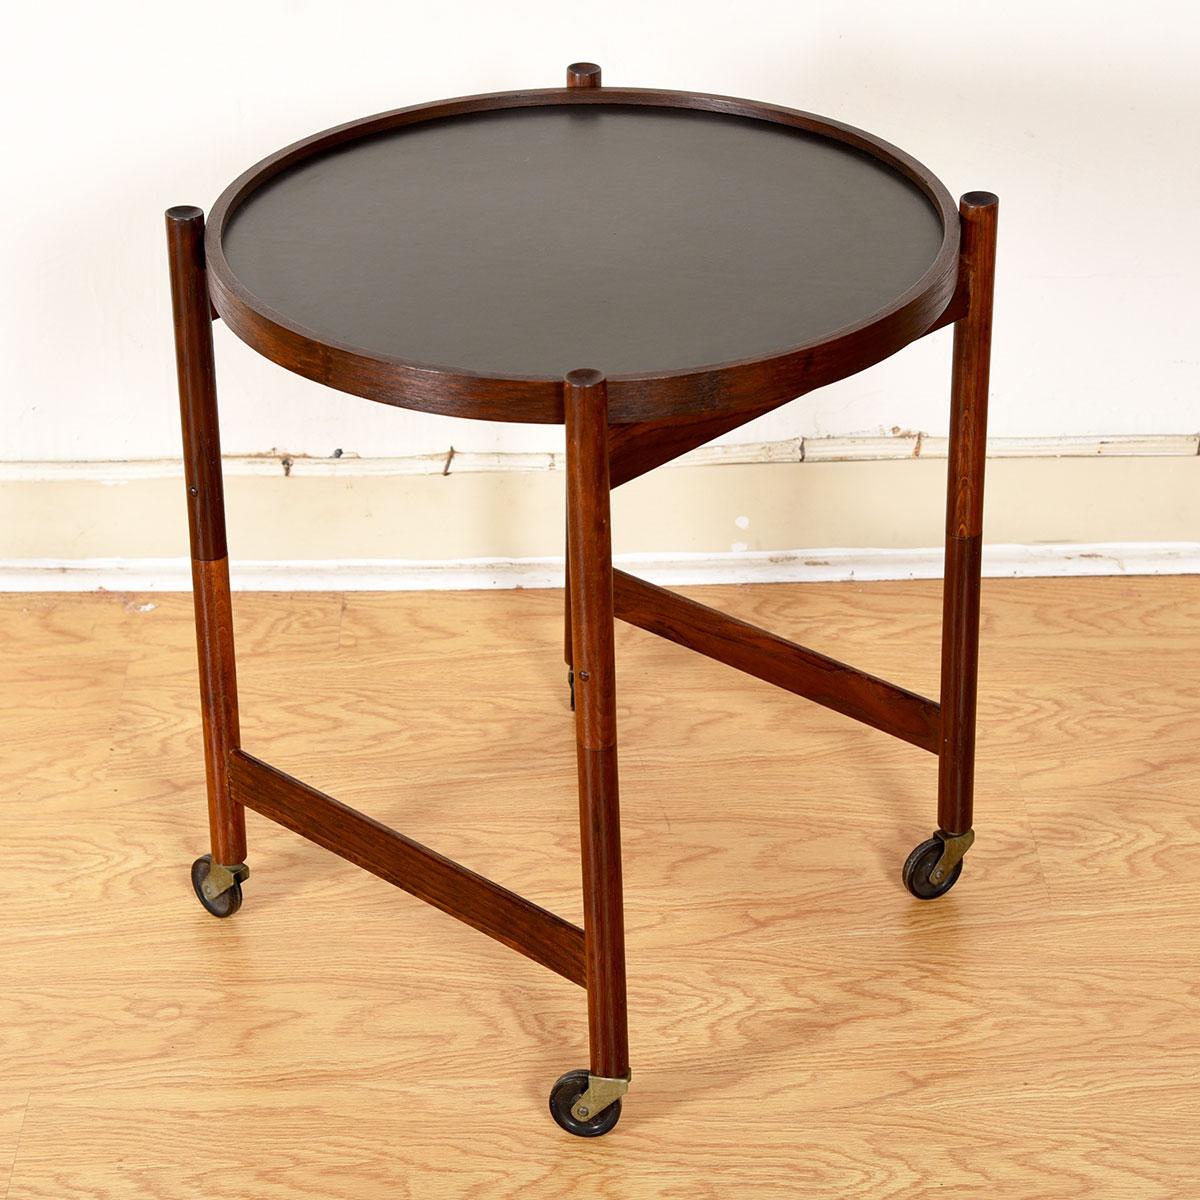 Danish Rosewood Collapsable Frame Fliptop Accent Table In Excellent Condition For Sale In Kensington, MD